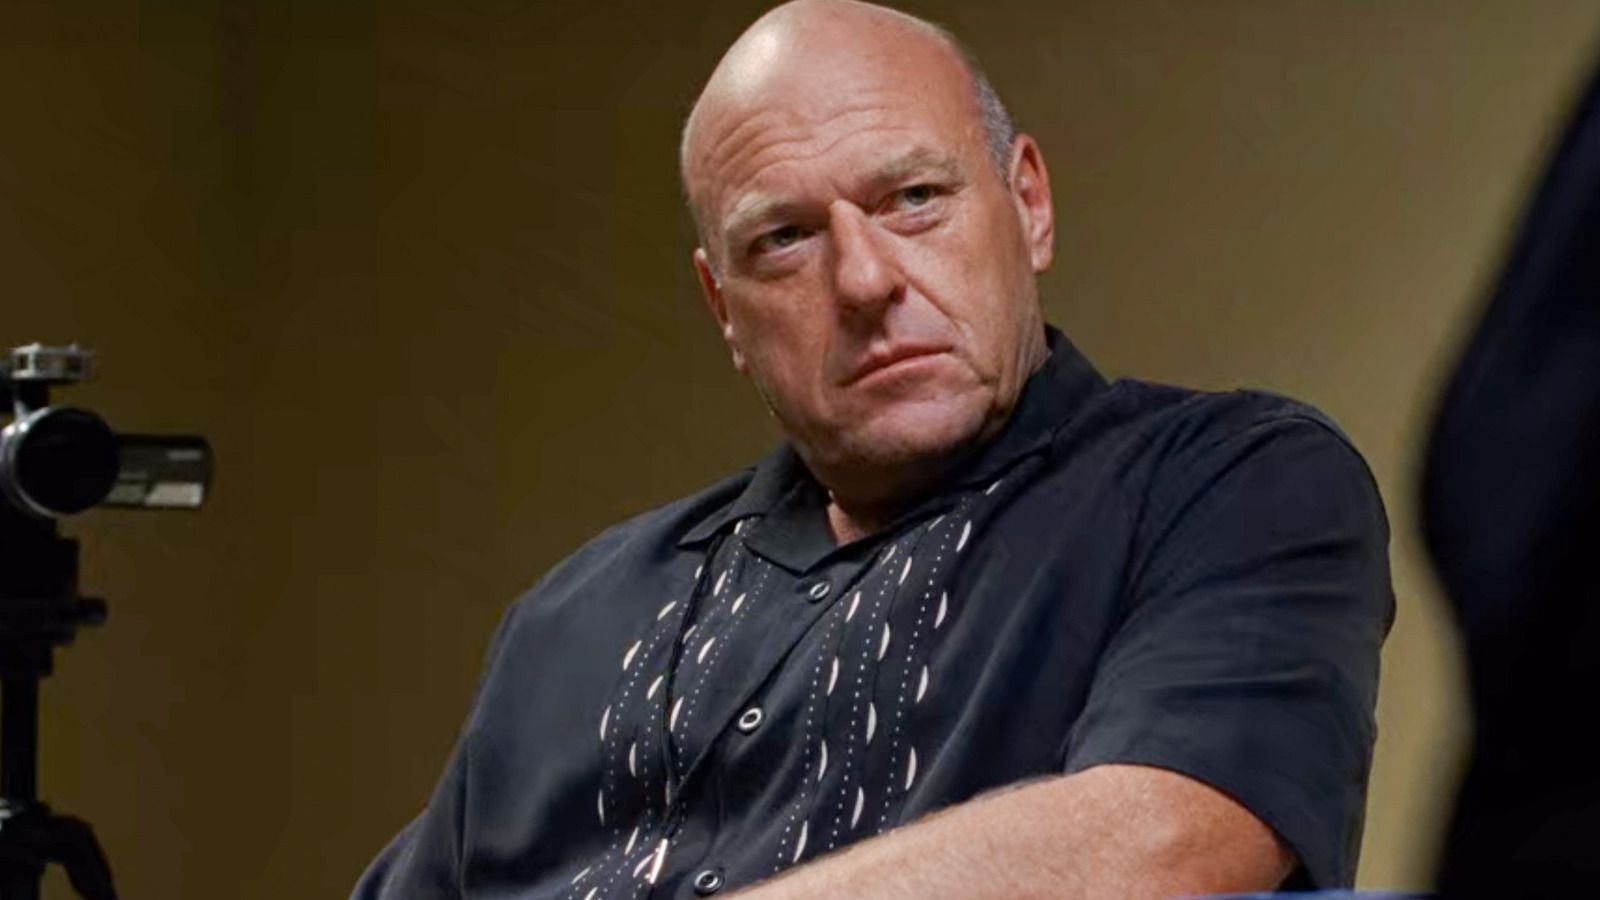 A Fellow Breaking Bad Star Inspired Dean Norris To Become An Actor